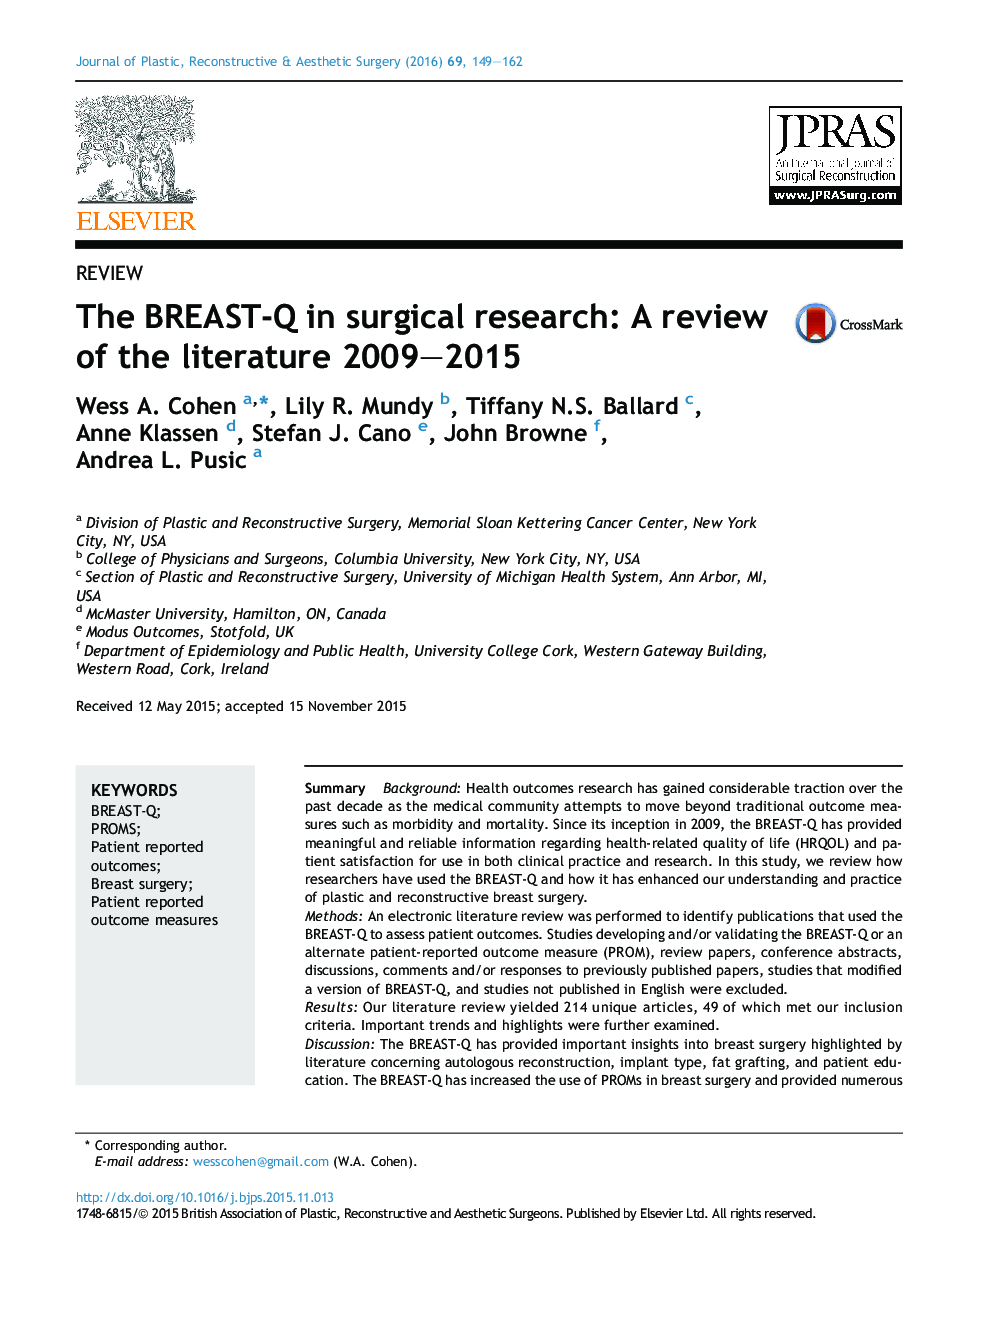 The BREAST-Q in surgical research: A review of the literature 2009–2015